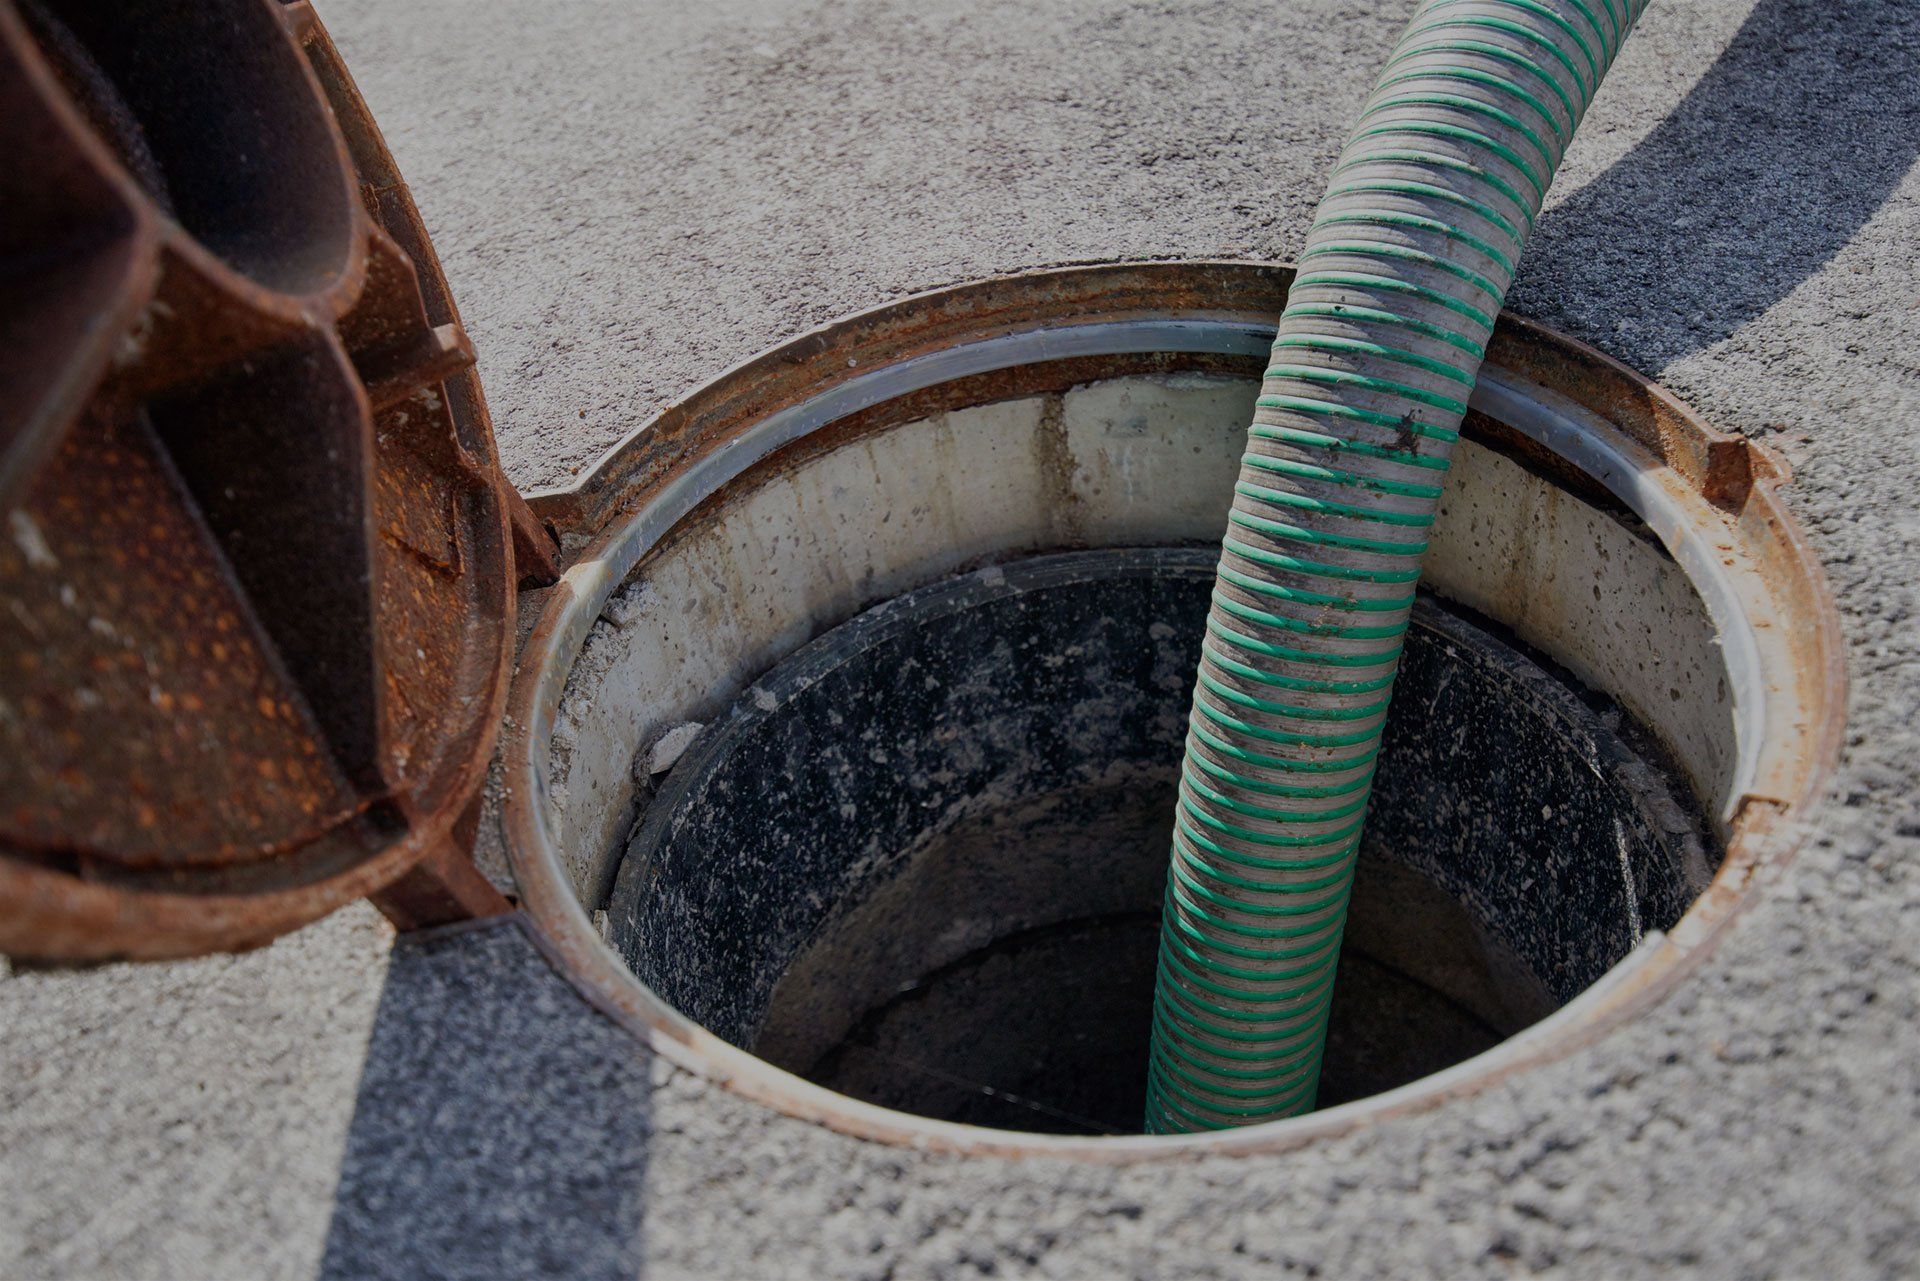 Top causes of septic problems in Fort Worth, TX